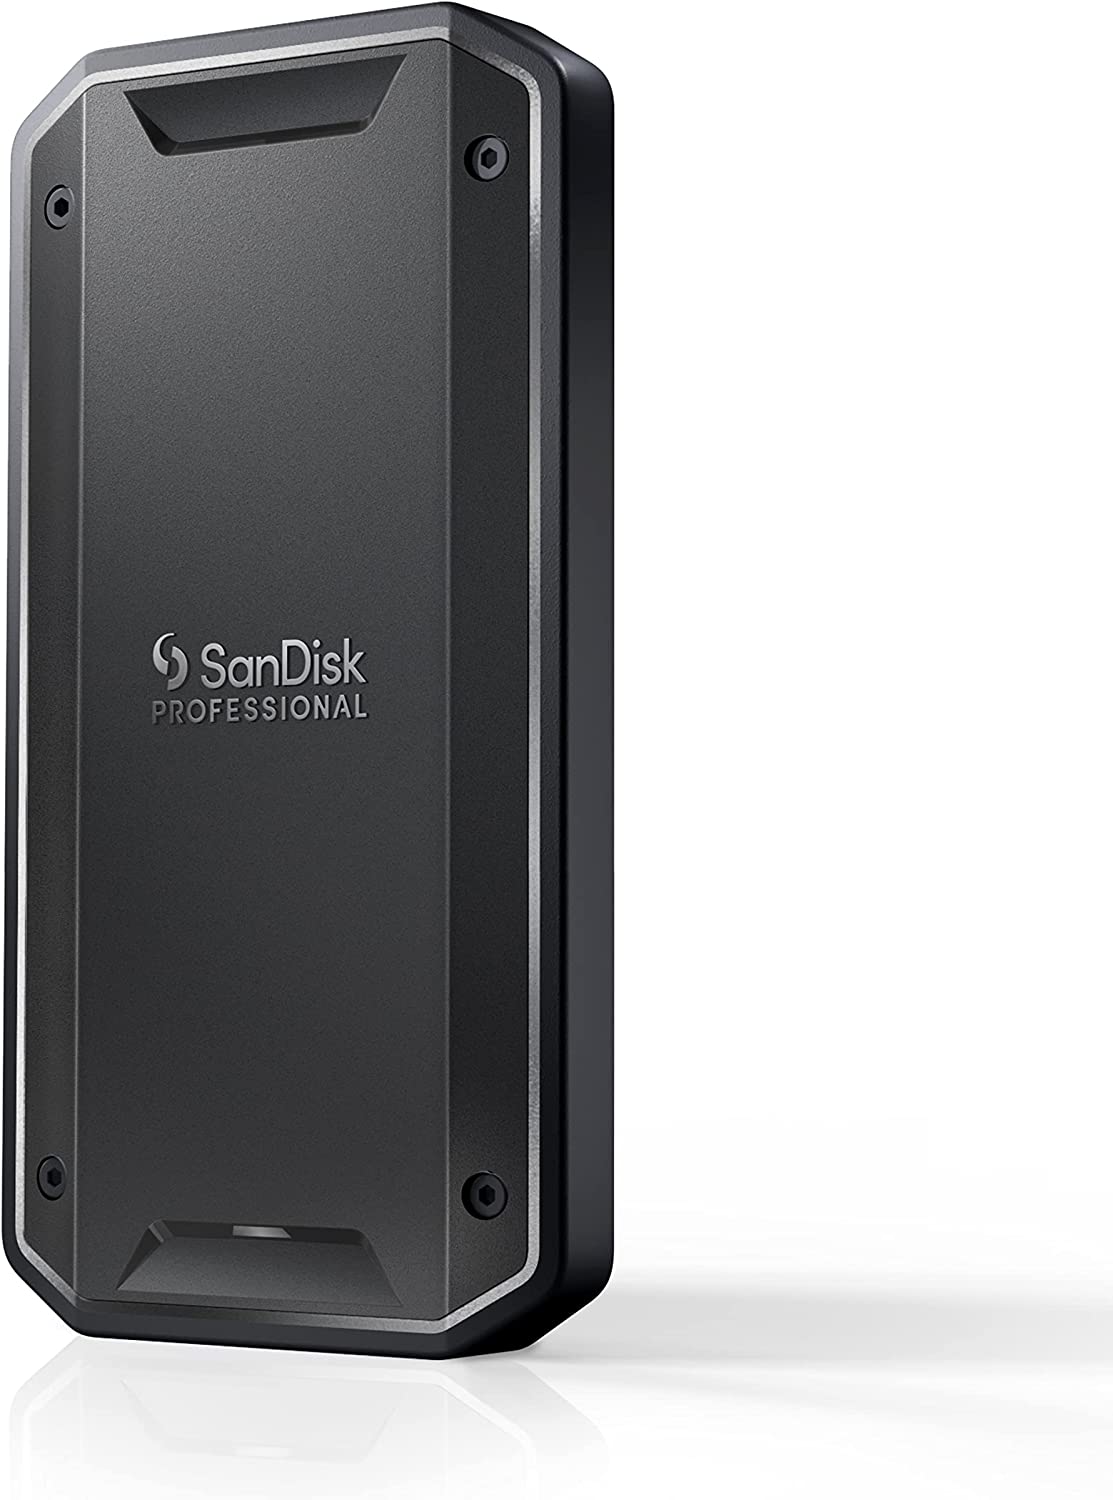 SanDisk Launches &#039;PRO-G40 SSD&#039; With Both Thunderbolt 3 and USB 3.2 Gen 2 Compatibility